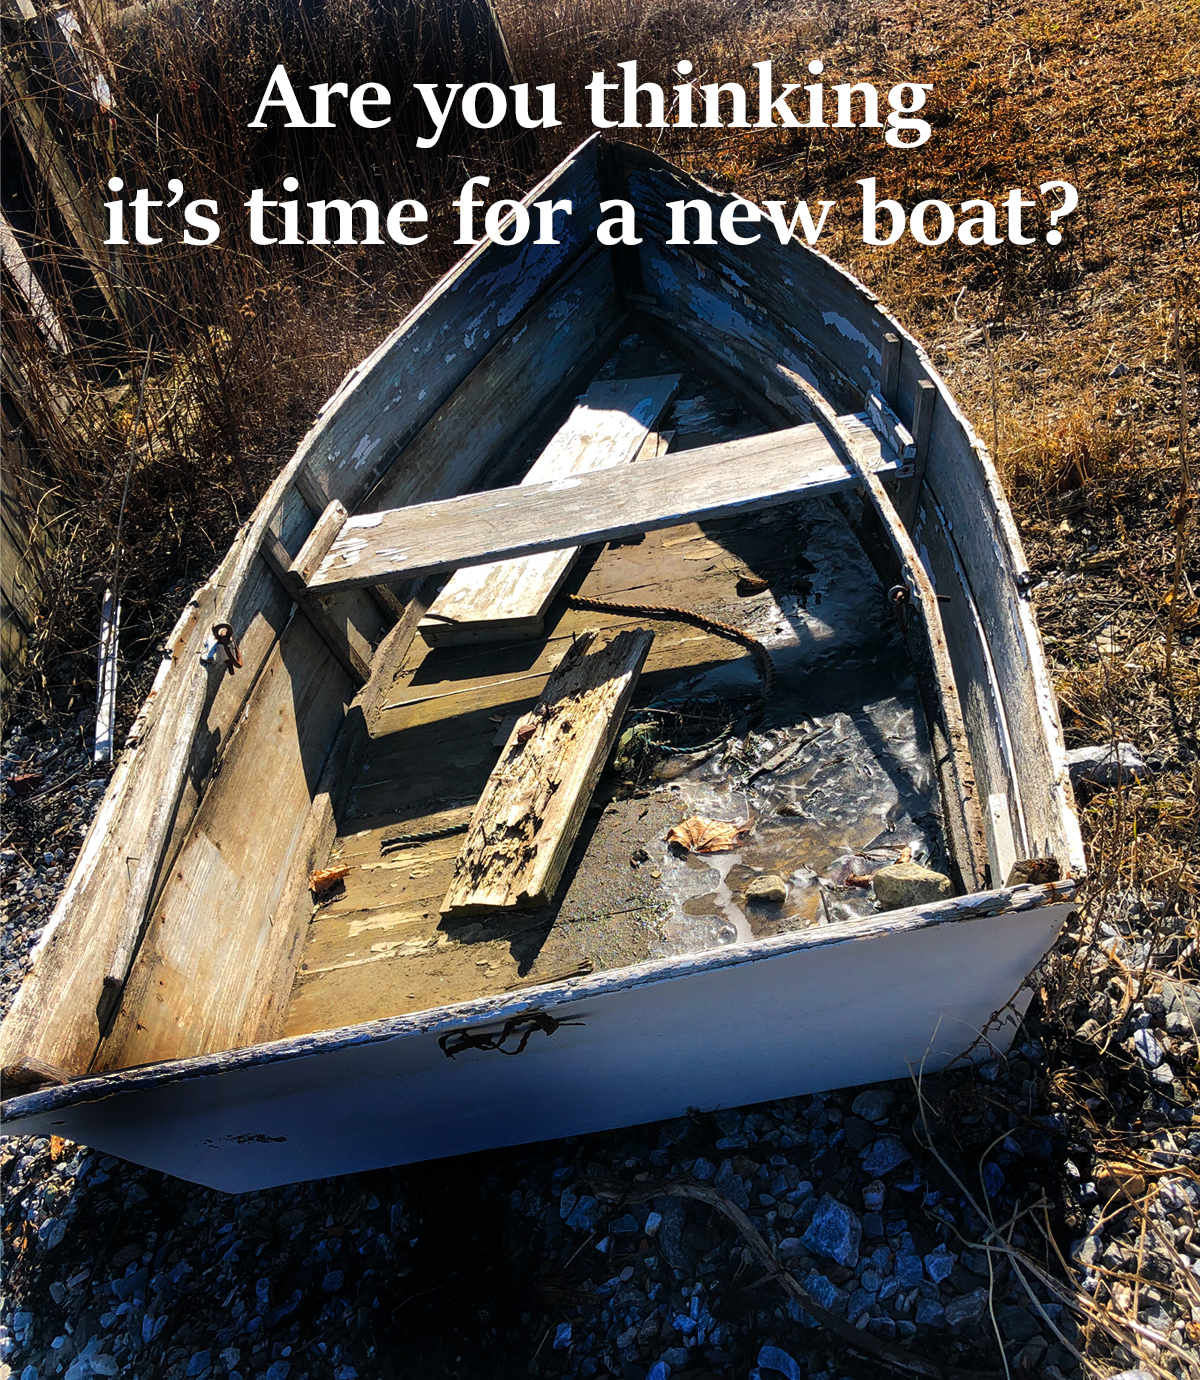 An old, beat-up boat with words over it that read: Are you thinking it's time for a new boat?